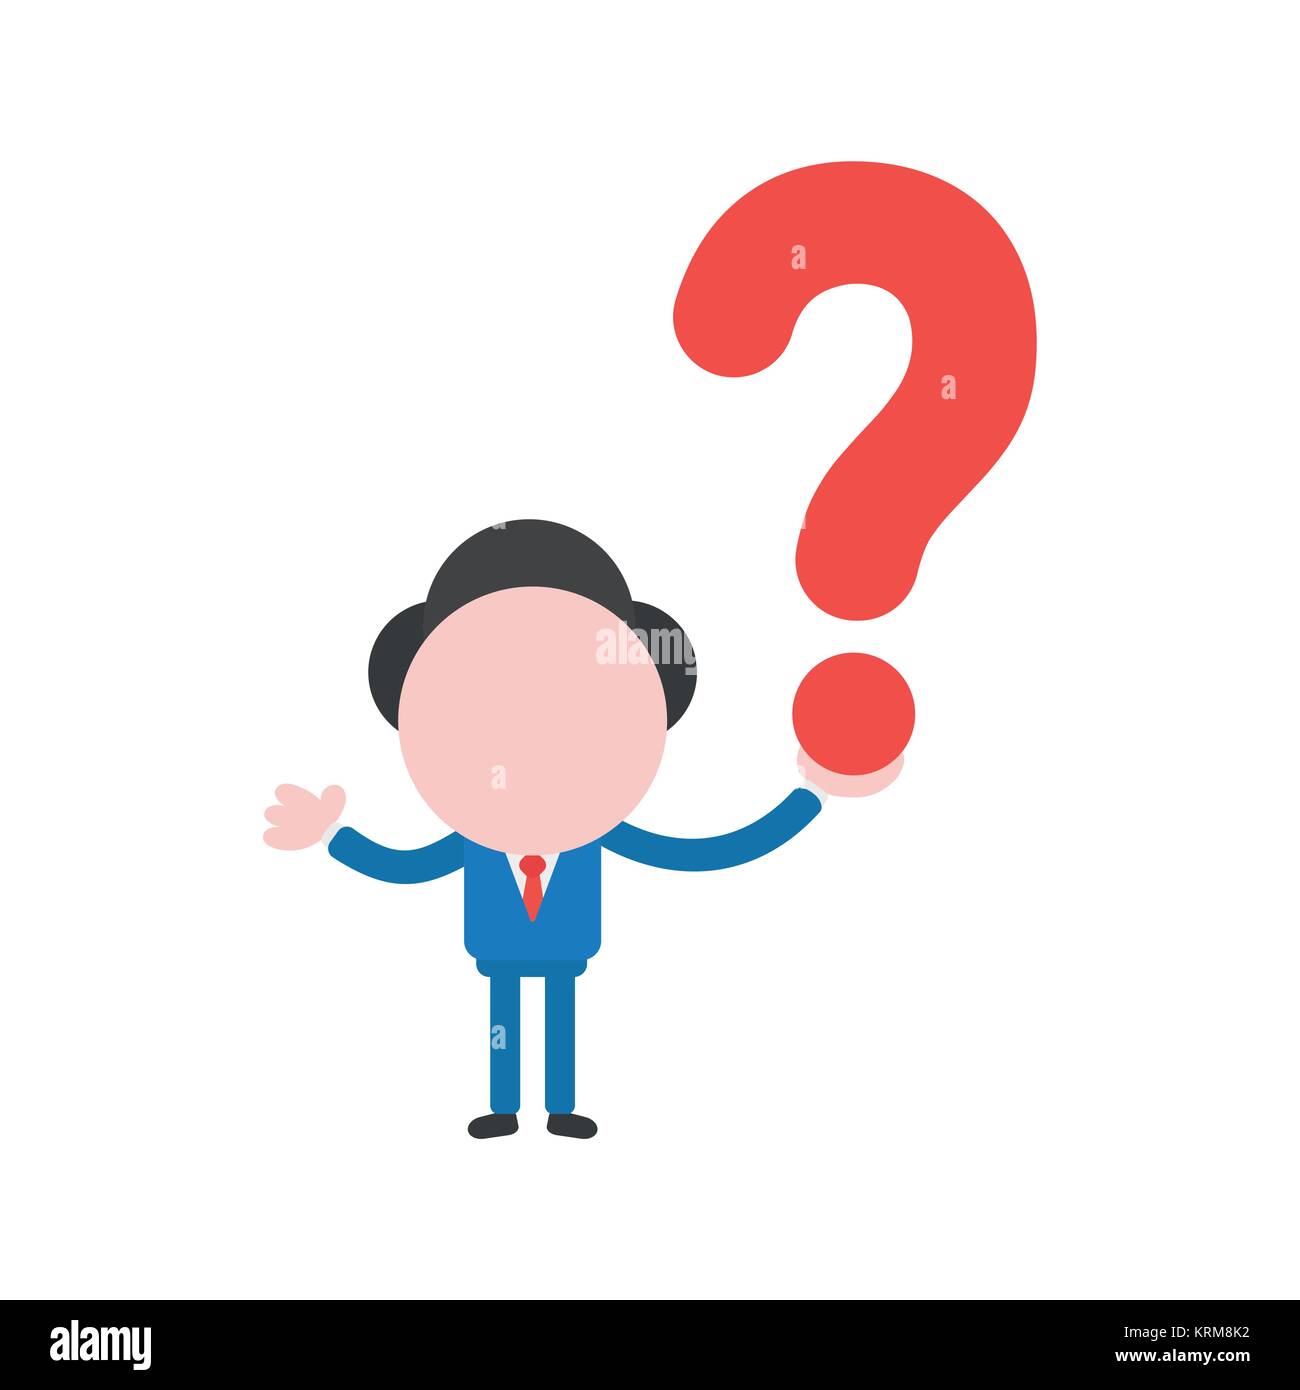 Vector cartoon illustration concept of faceless businessman mascot character holding red question mark symbol icon. Stock Vector